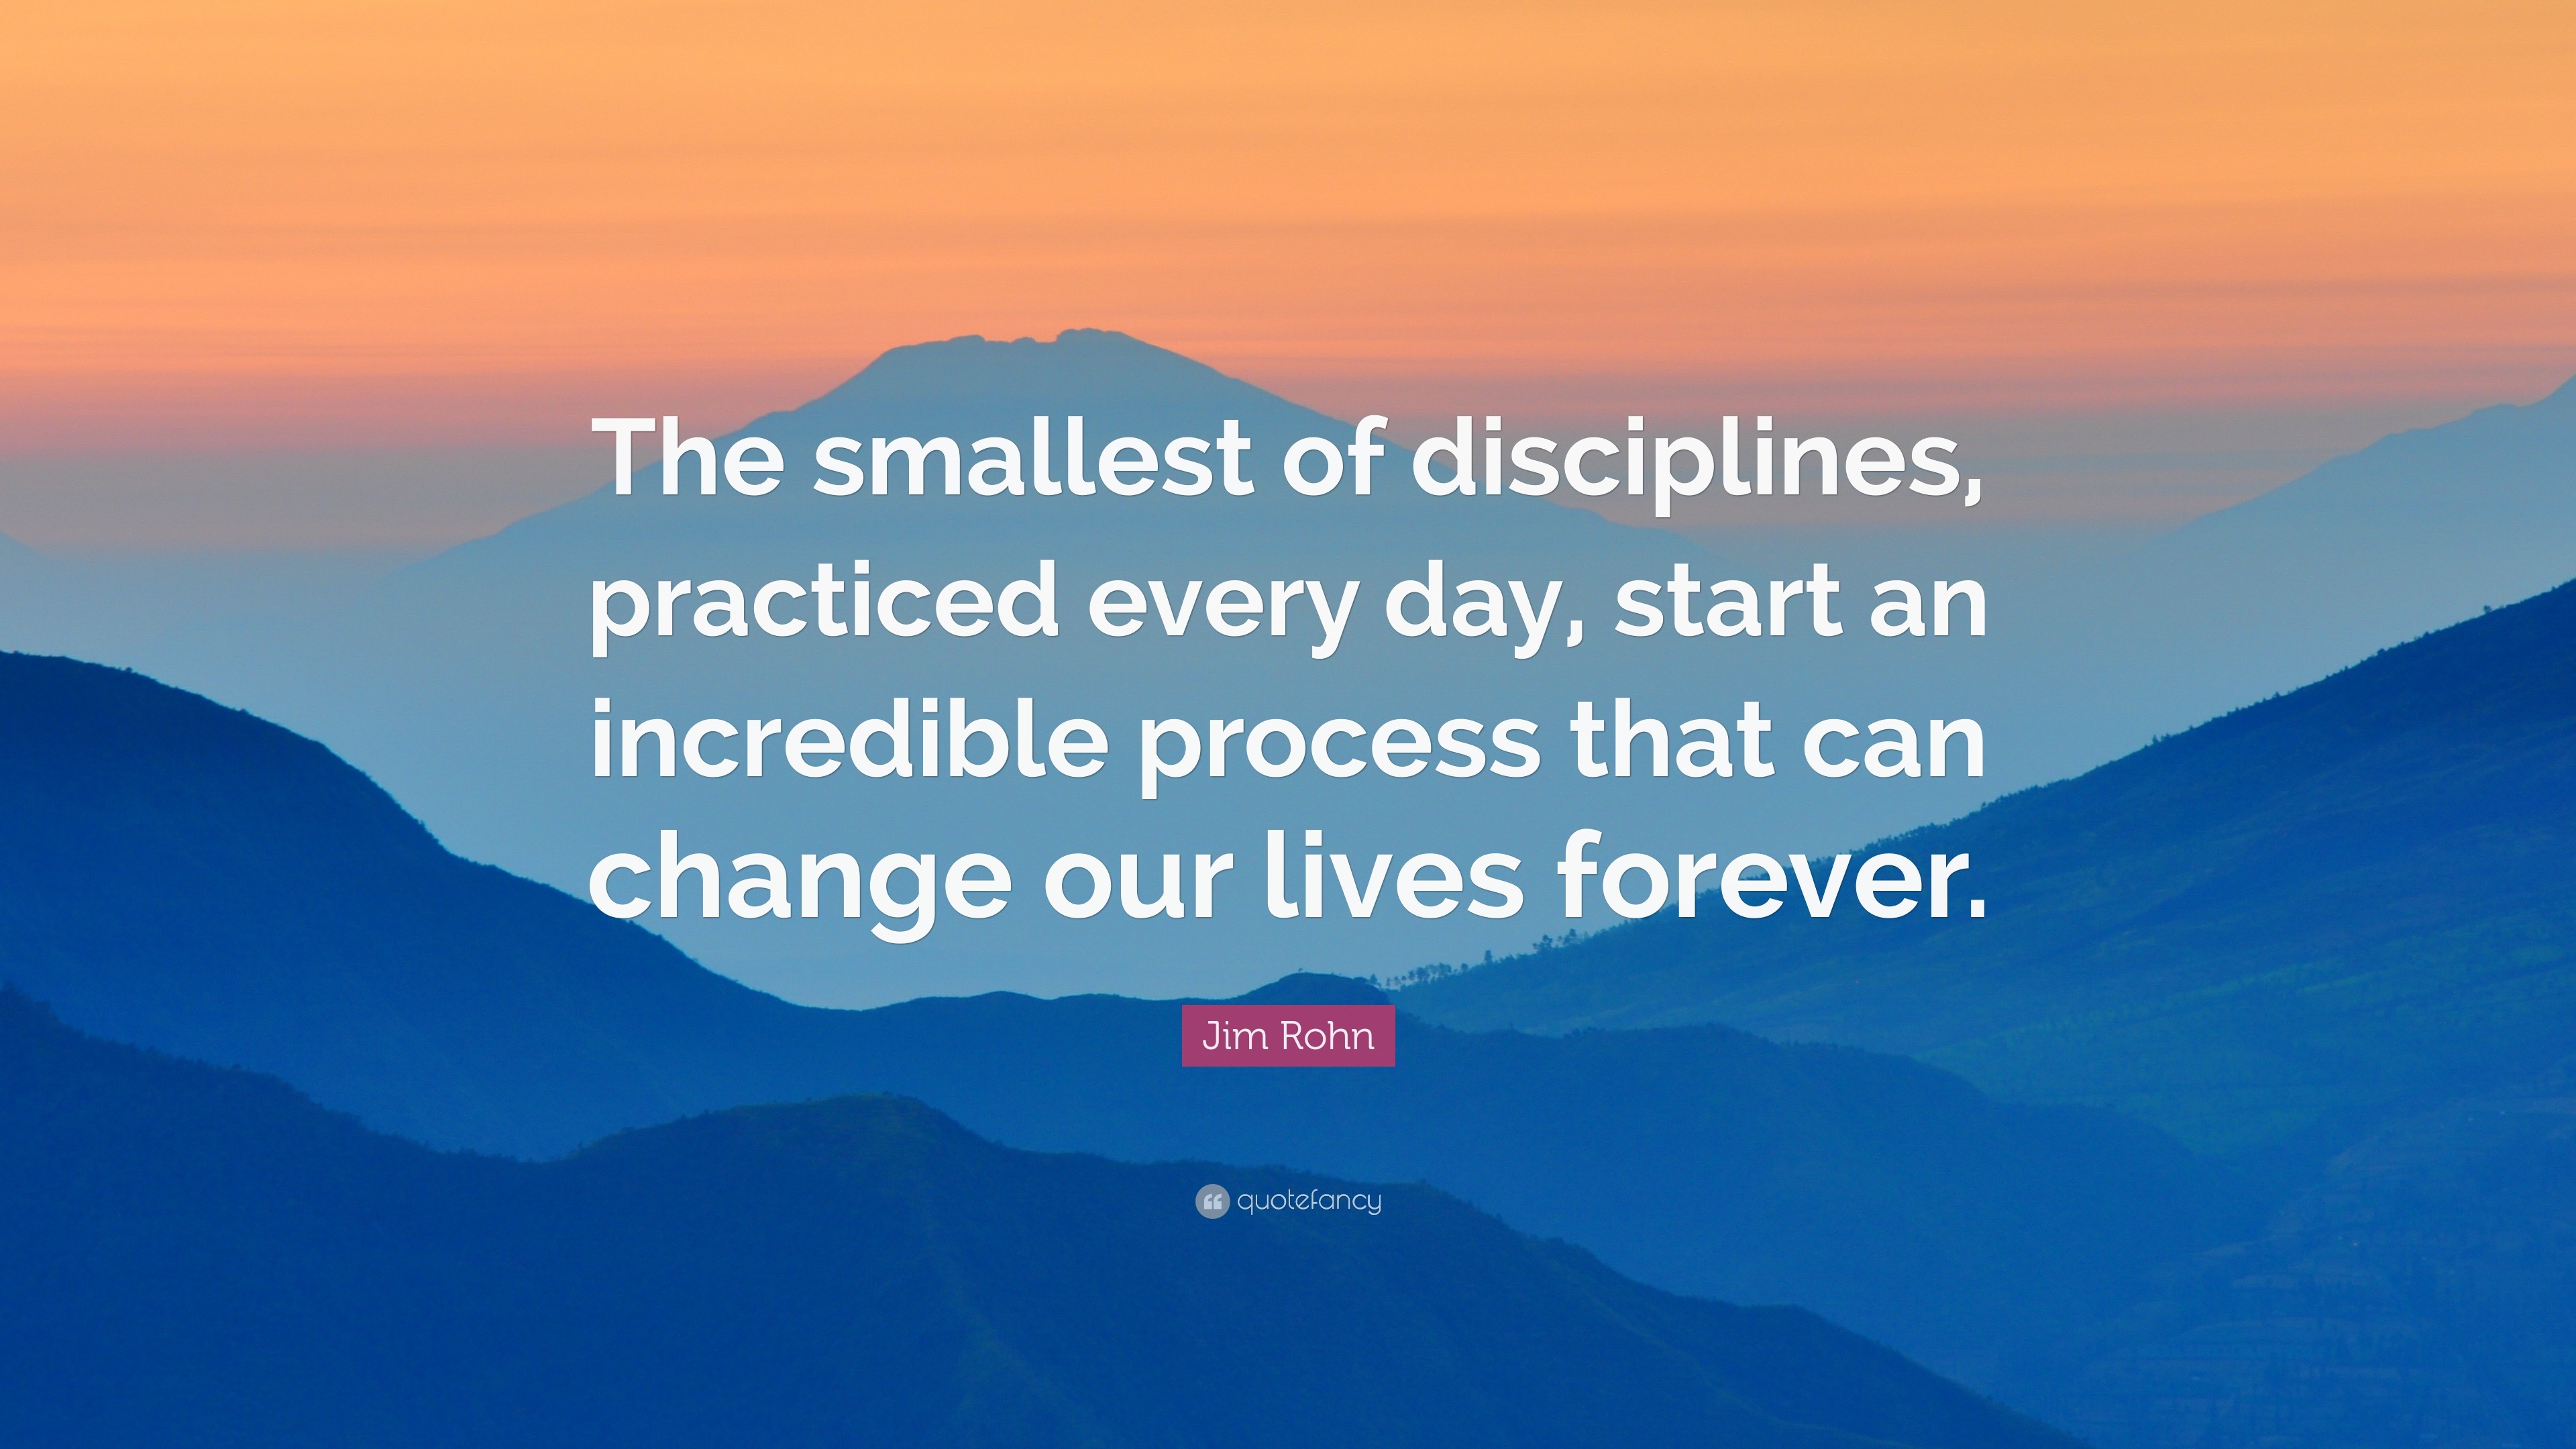 Jim Rohn Quote: “The smallest of disciplines, practiced every day ...